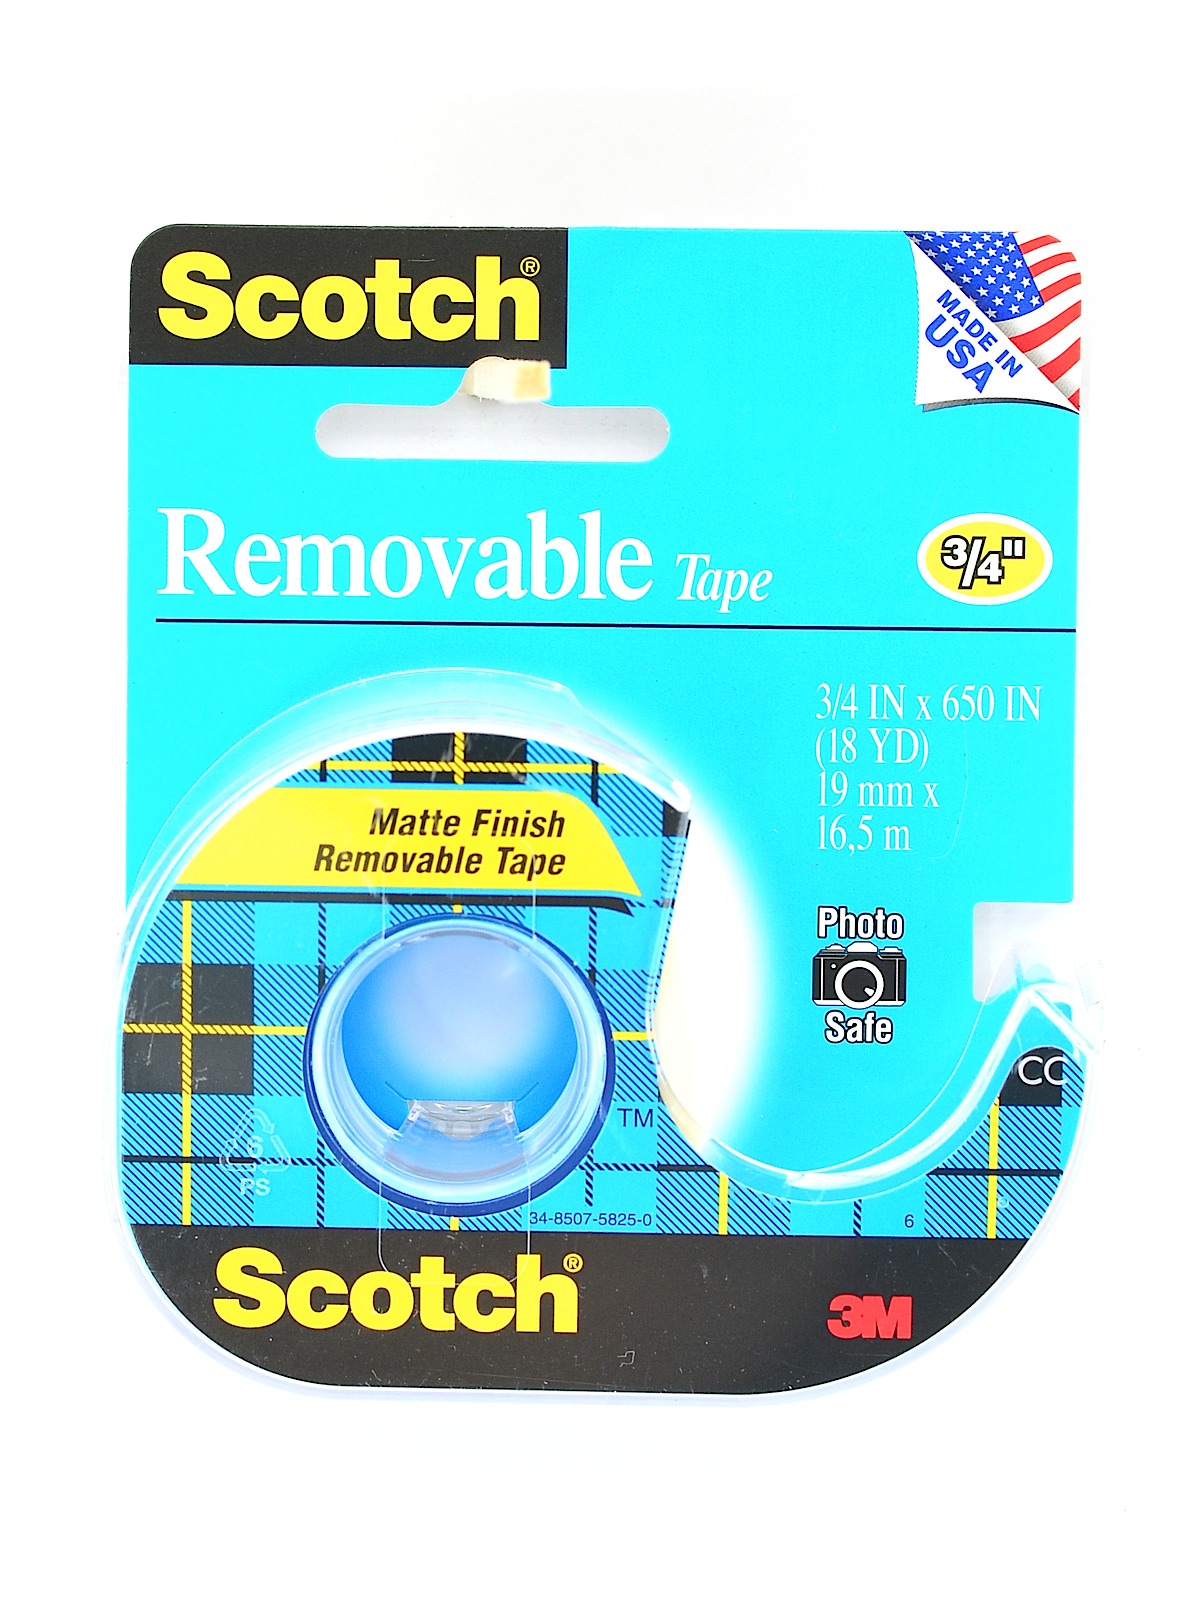 Scotch Magic Tape Removable 811 3 4 In. X 18 Yd. Dispenser Roll